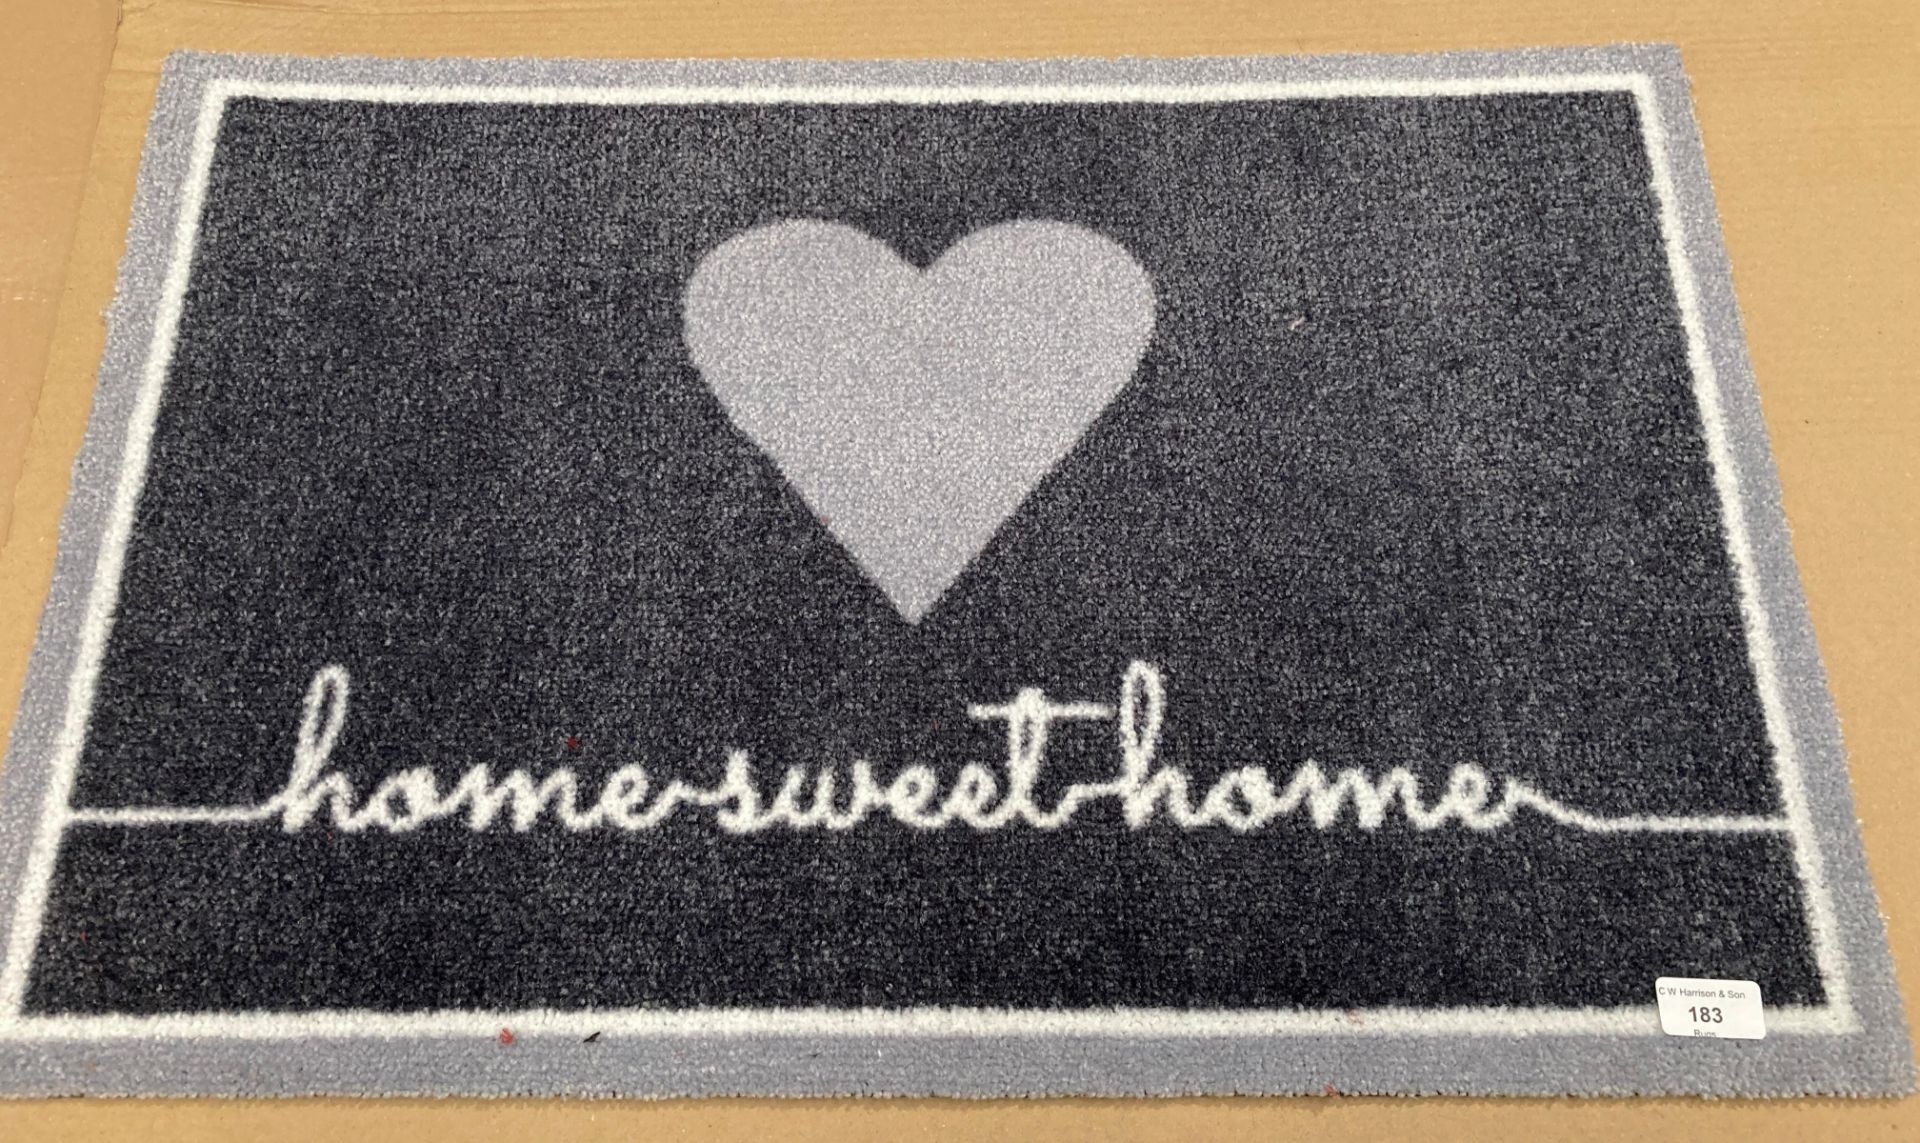 30 x Grey 'Home Sweet Home' mats 75cm x 50cm (F&G3) *Please note the final purchase price is